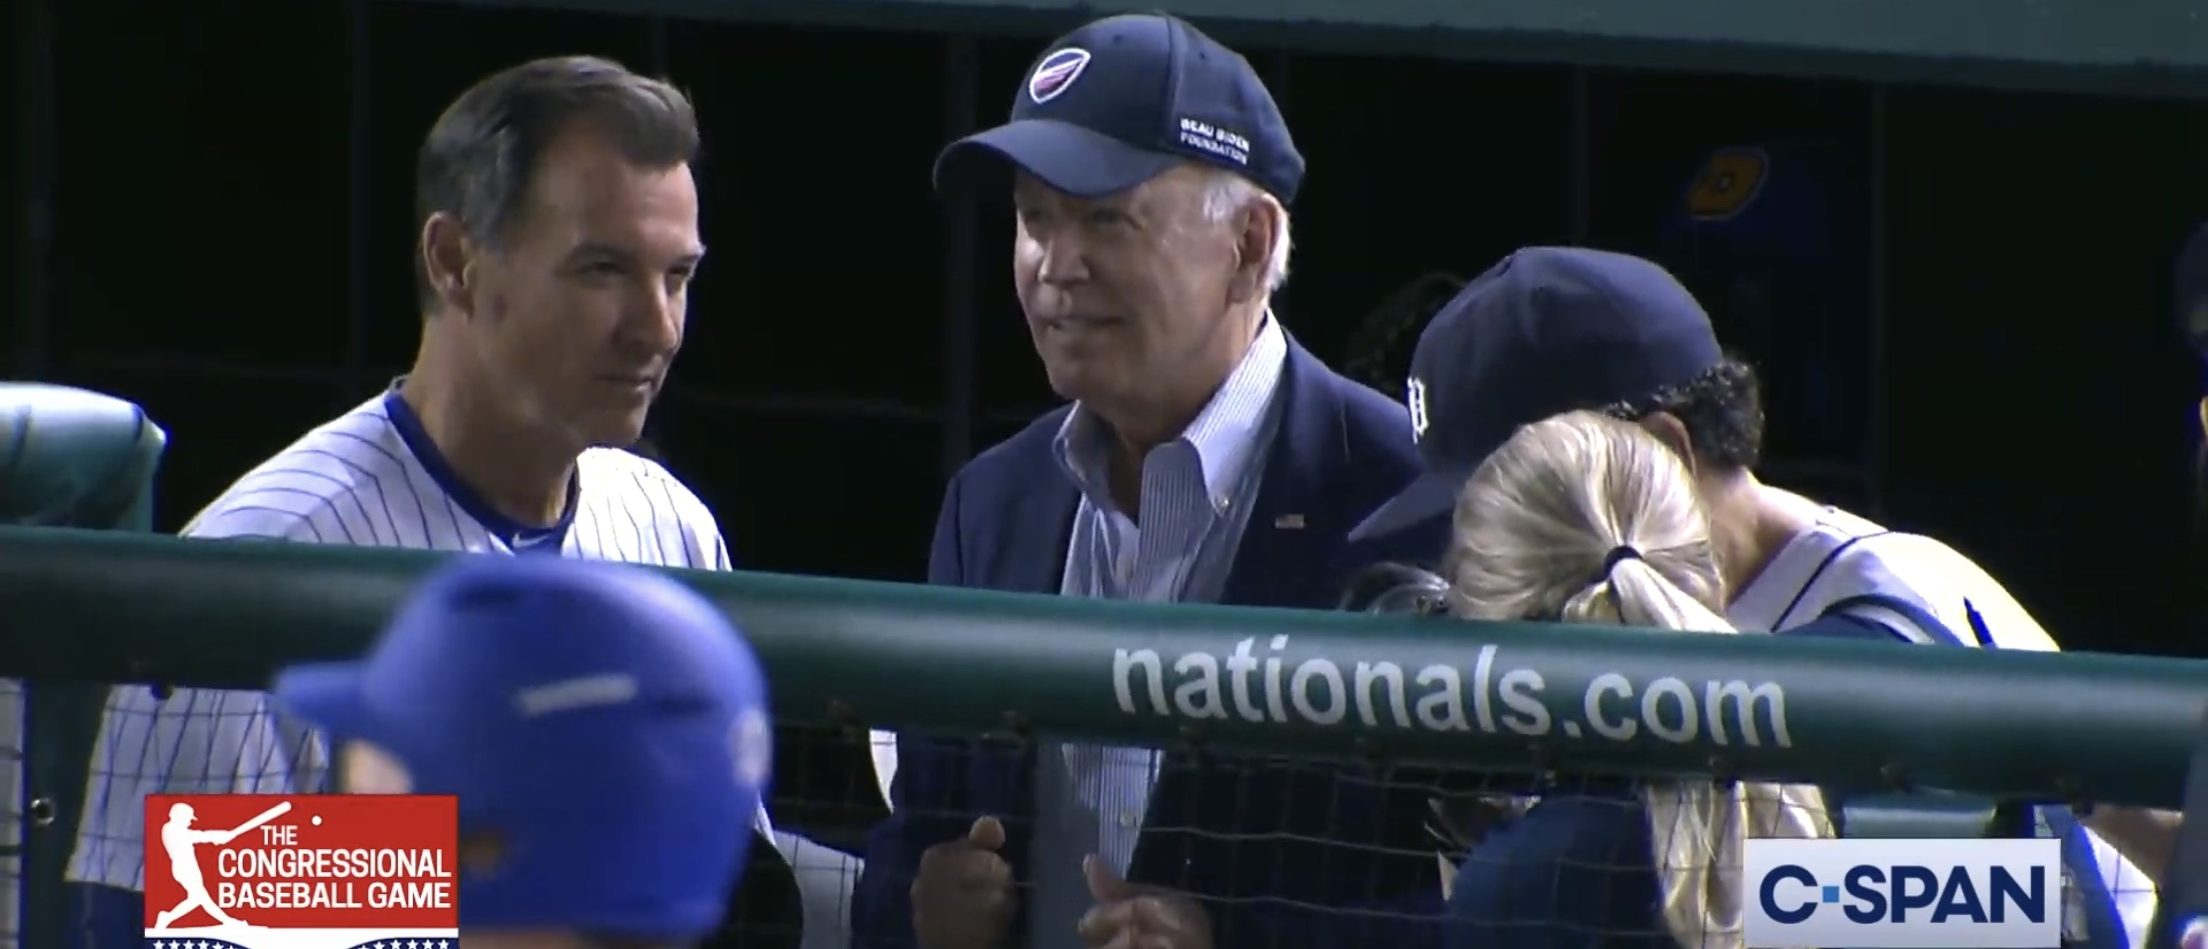 Biden Hands Out Ice Cream At Baseball Game While Infrastructure Negotiations Intensify thumbnail